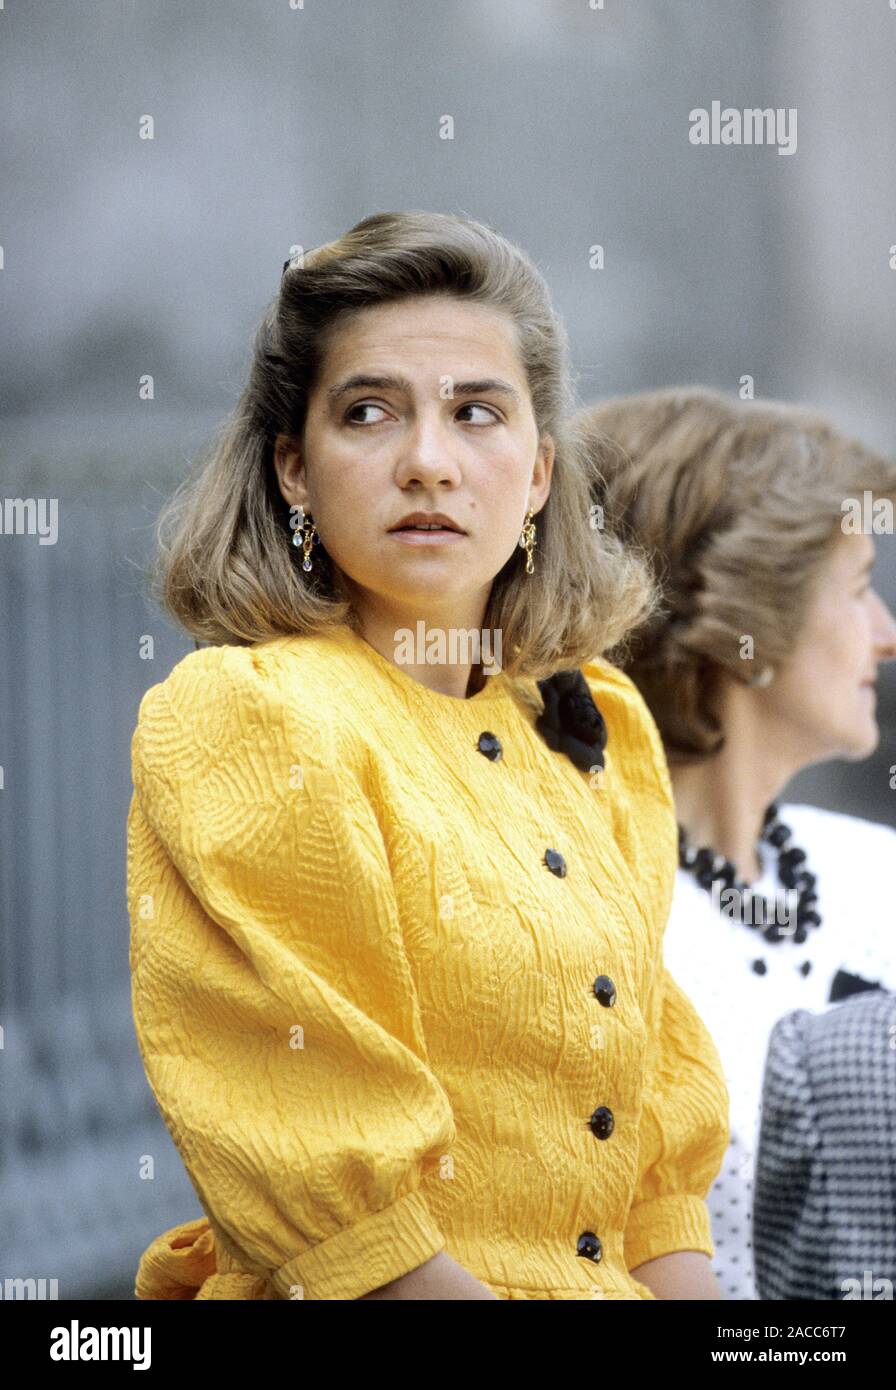 Infanta Cristina awaits the arrival of TRH Prince and Princess of Wales - Prince Charles and Princess Diana on their Royal Tour of Spain, Madrid 1987 Stock Photo